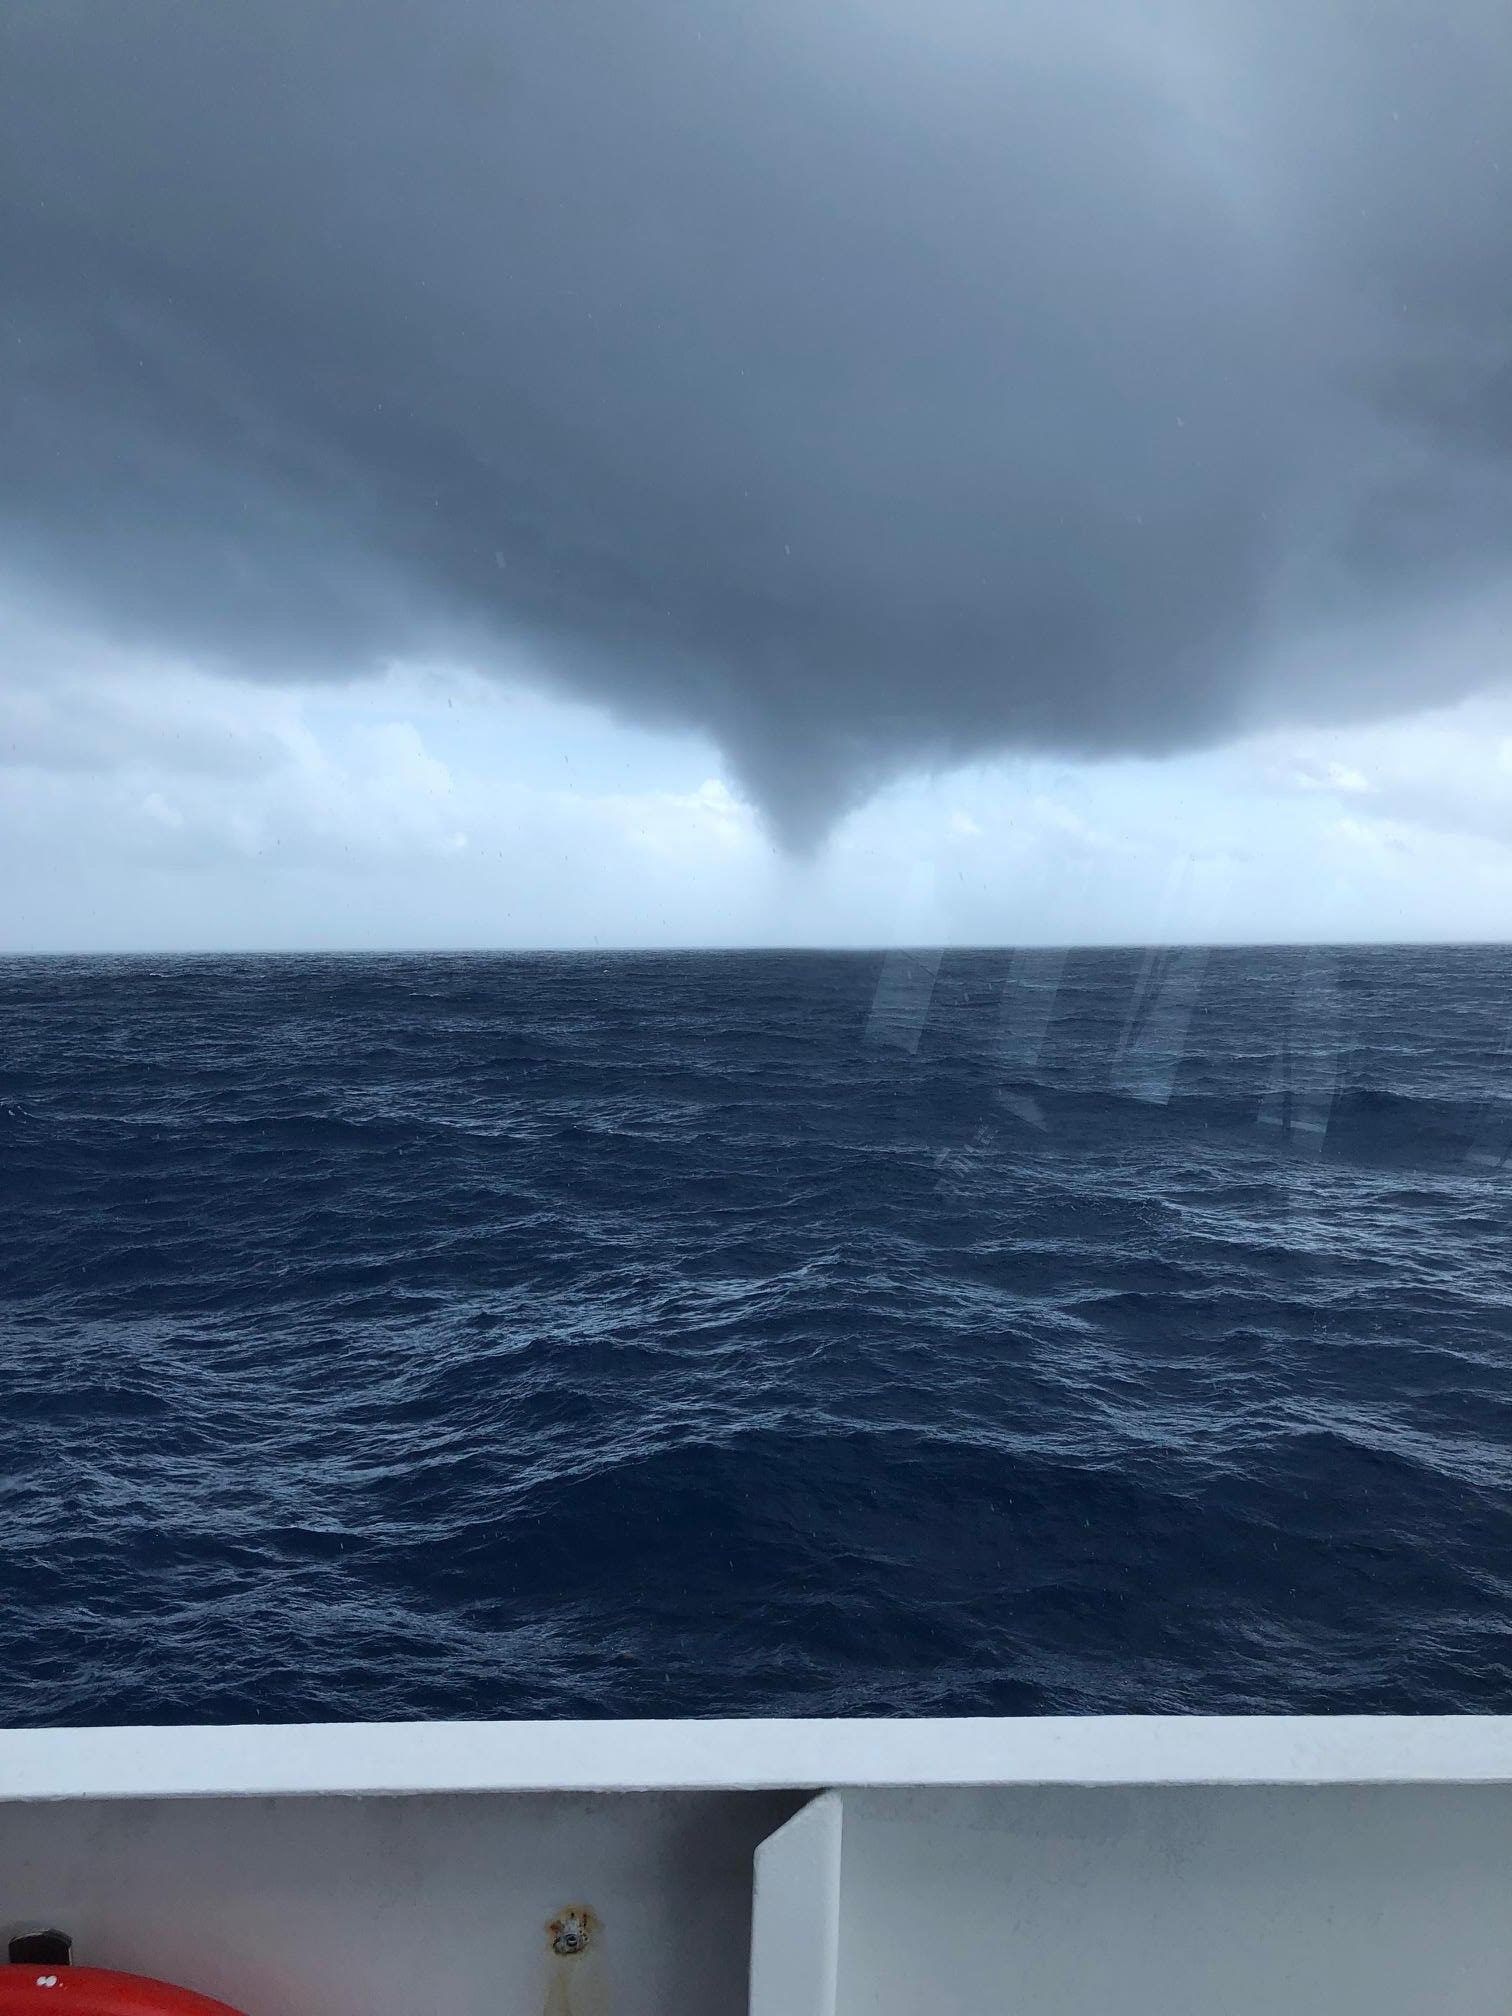 Journey into Midnight: Light and Life Below the Twilight Zone (c) The waterspout on portside of the vessel, (c) NOAA / Joshua Bierbaum
